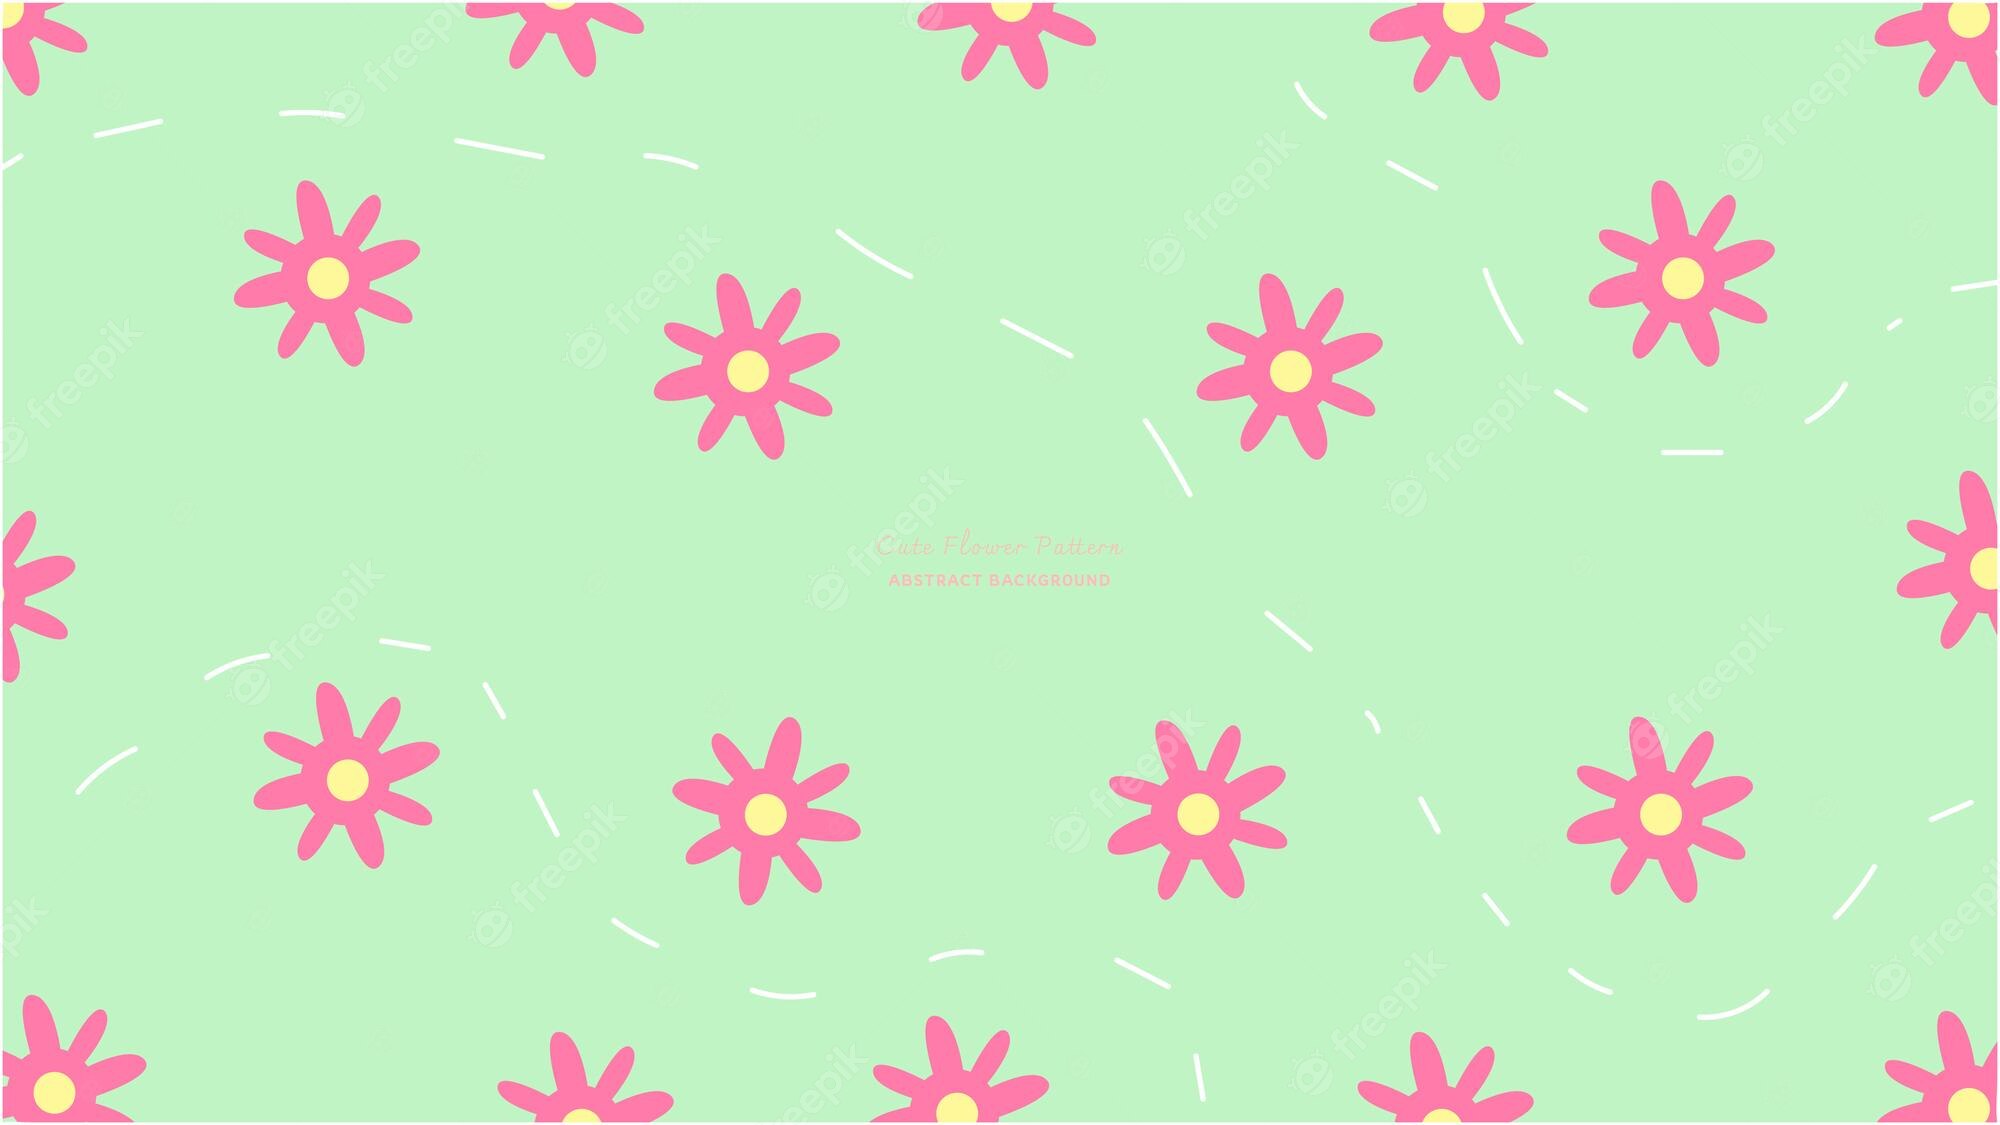 Premium Vector. Cute wallpaper or abstract background with simple flowers pattern with bold pink petals